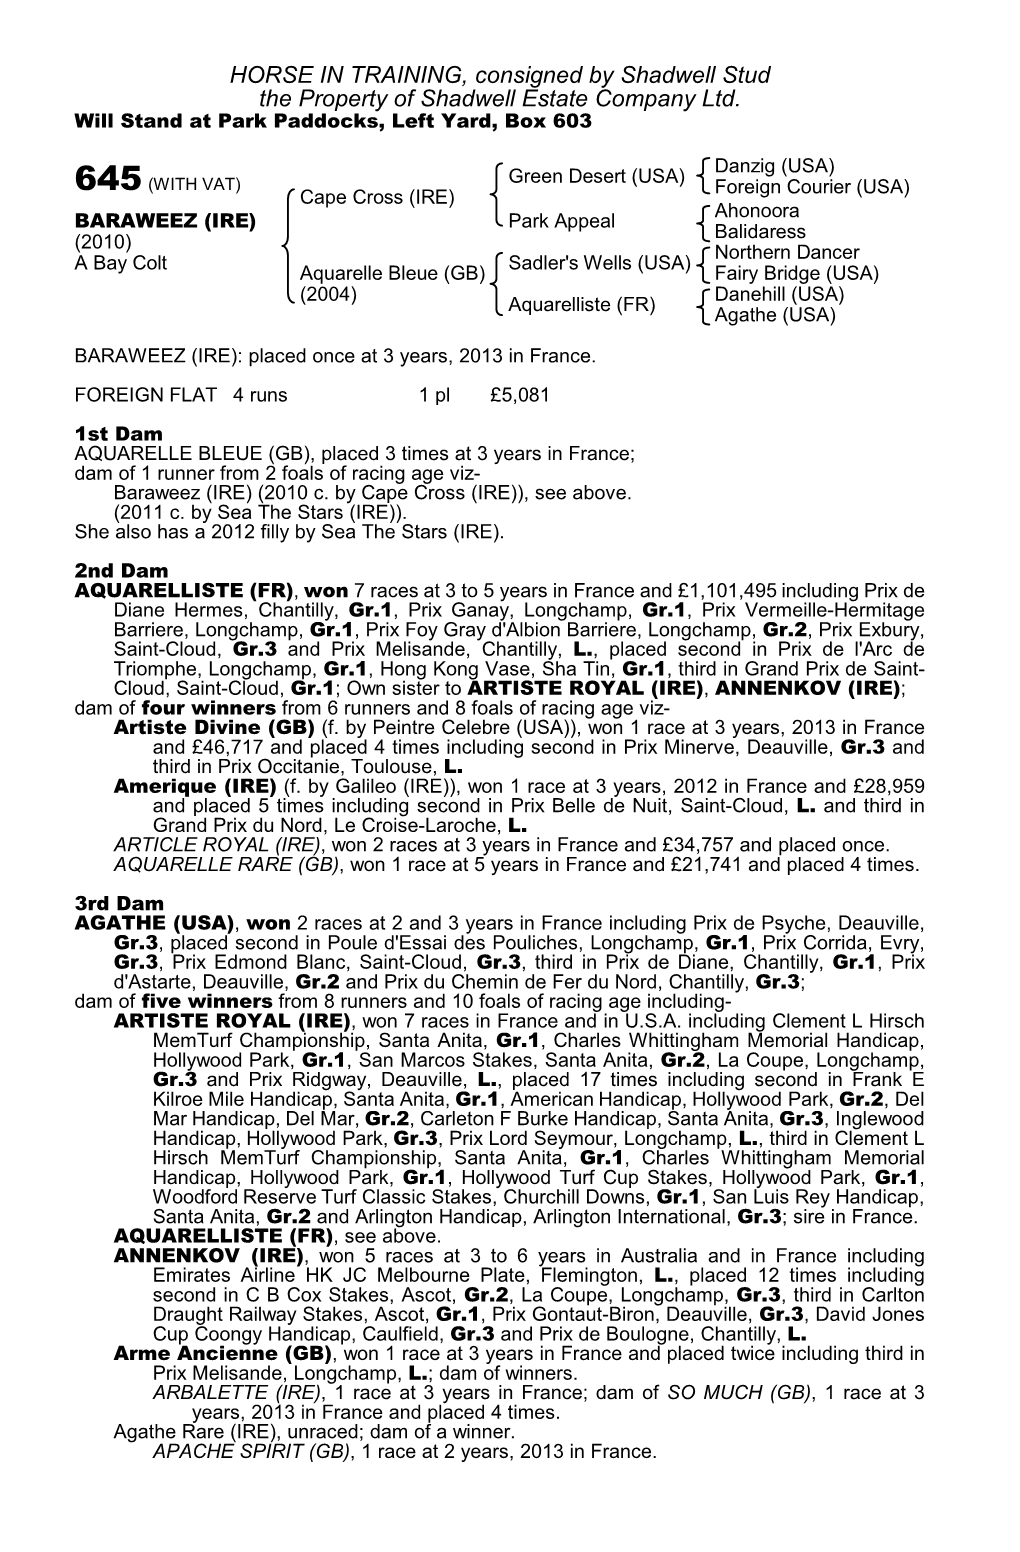 HORSE in TRAINING, Consigned by Shadwell Stud the Property of Shadwell Estate Company Ltd. Will Stand at Park Paddocks, Left Yard, Box 603